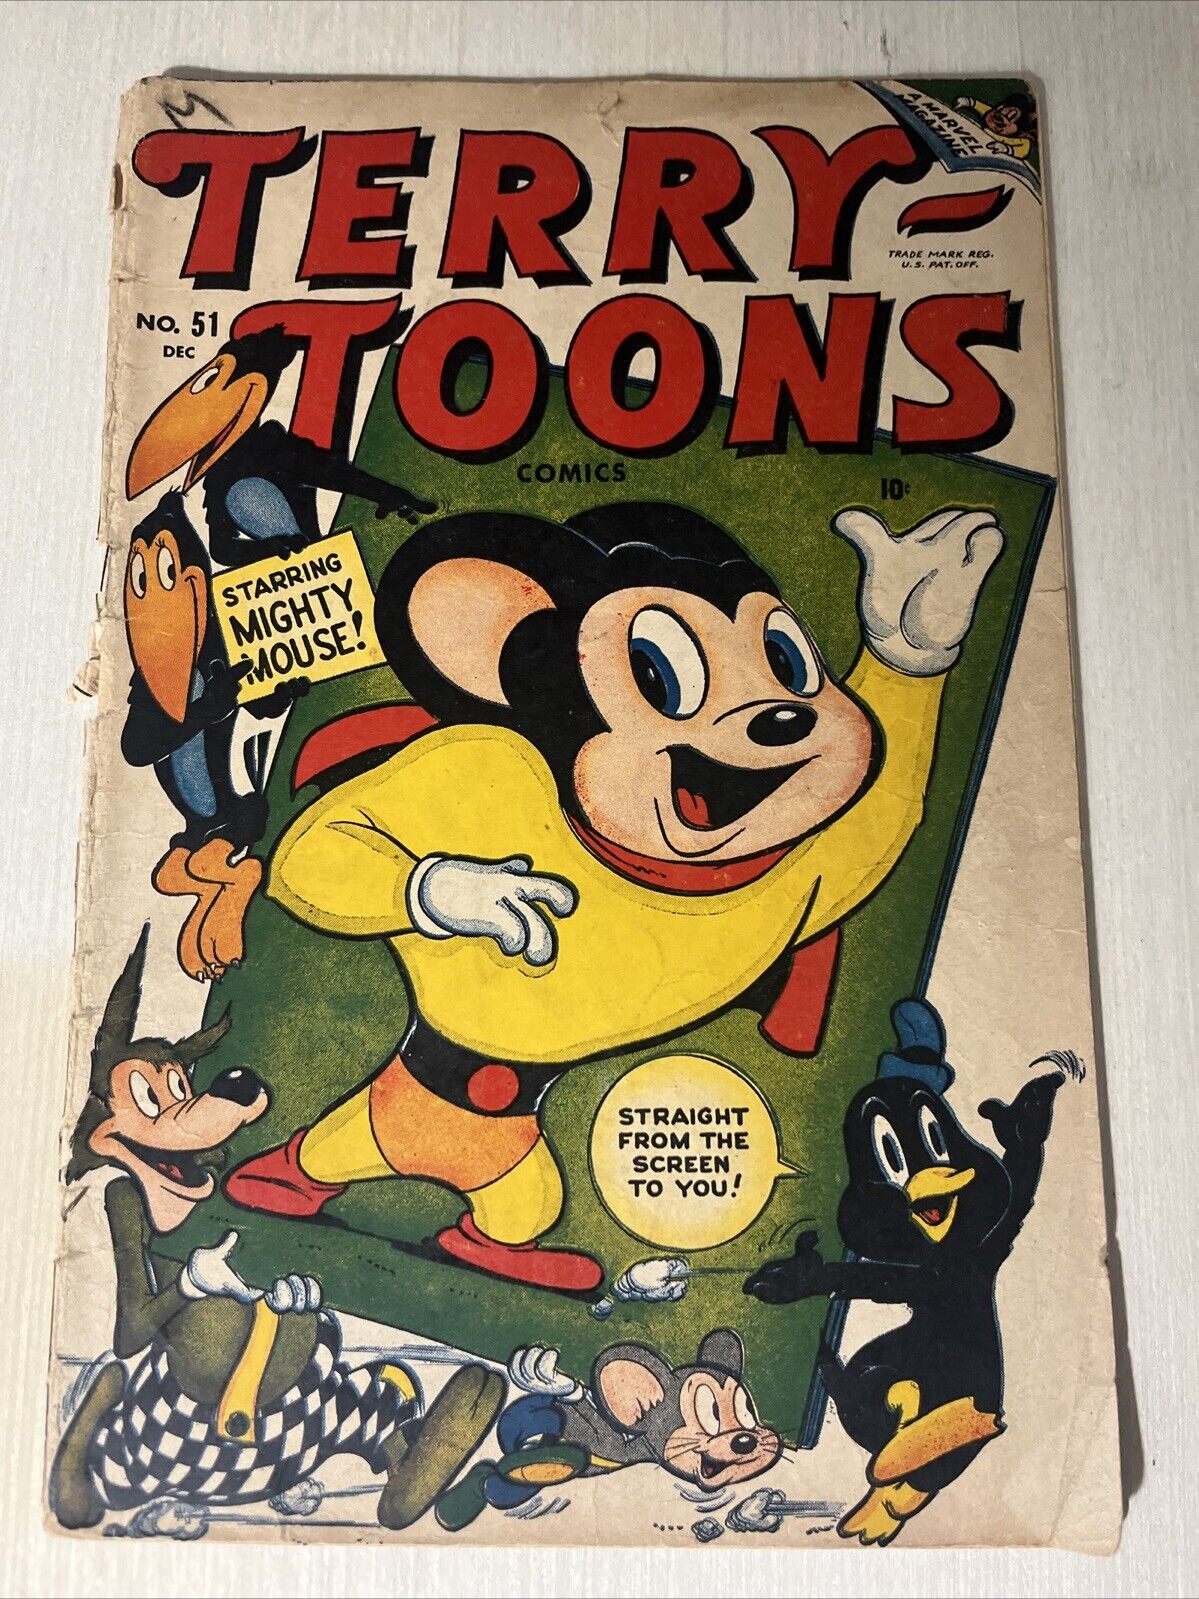 Terry-Toons Comics #51 (1948, Timely Comics) Early Mighty Mouse Appearance